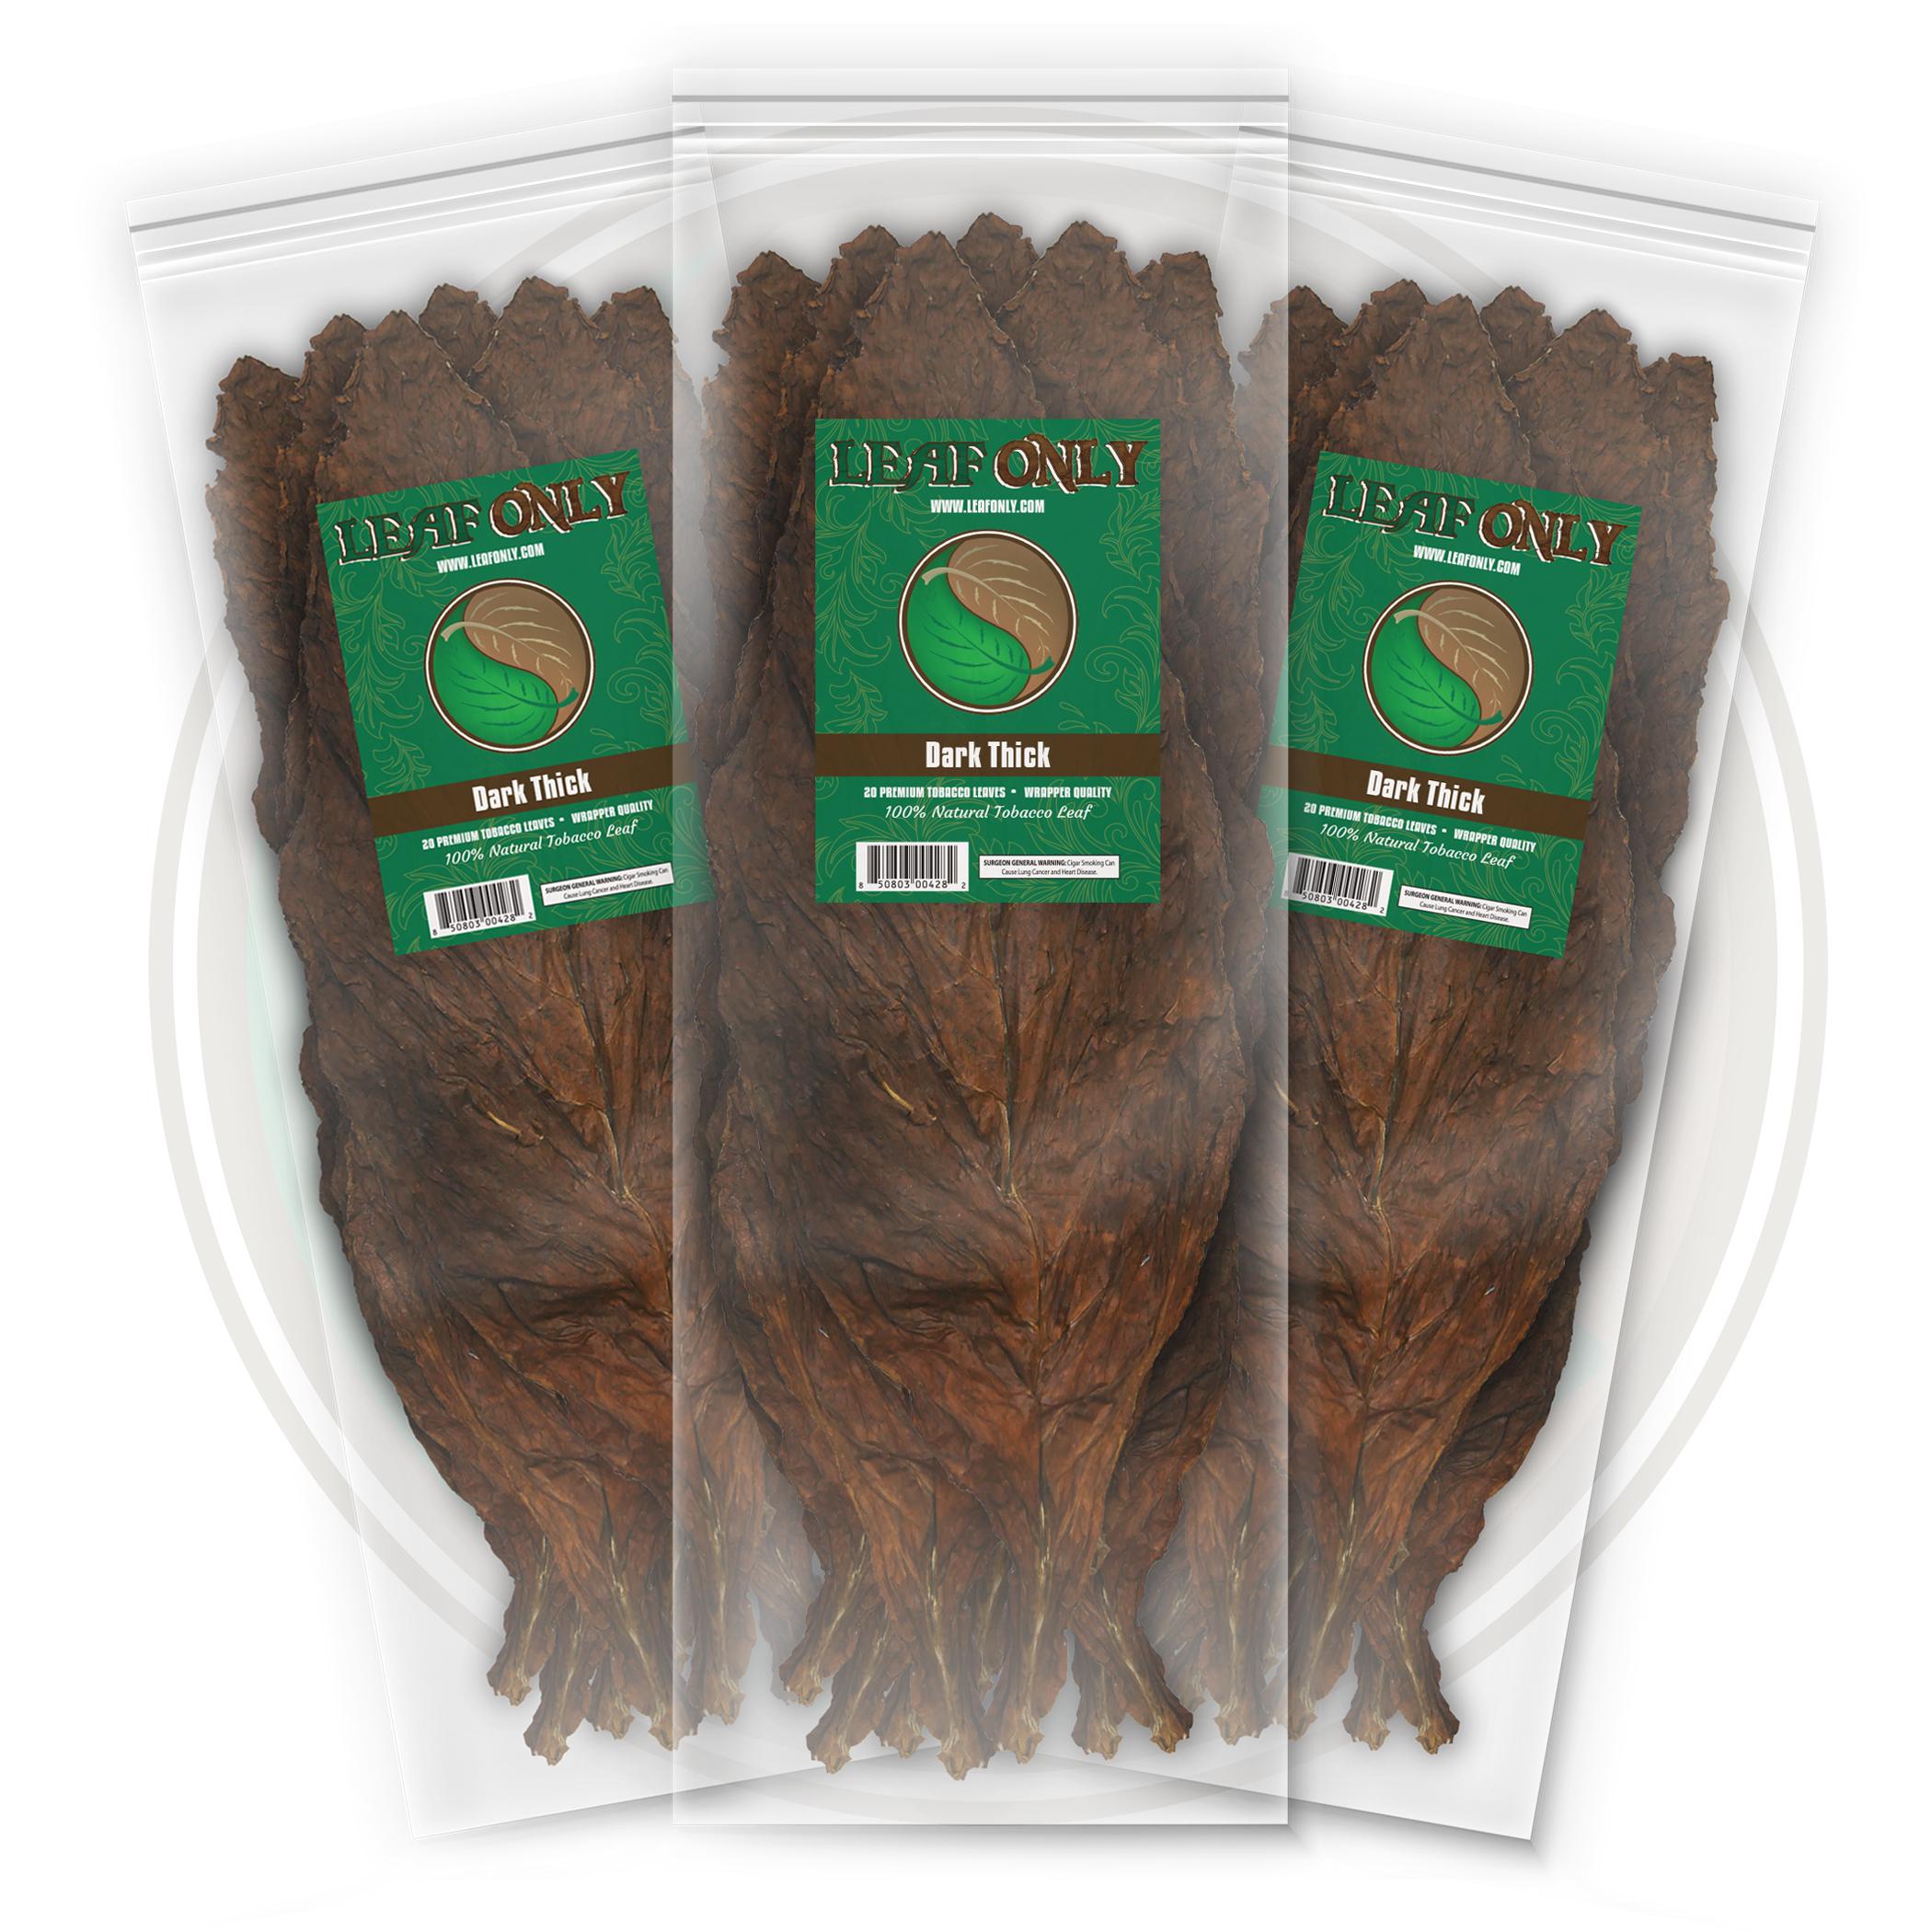 Grabba Leaf vs Fronto Leaf- 5 Herbal Uses To Know - The Real Grabba